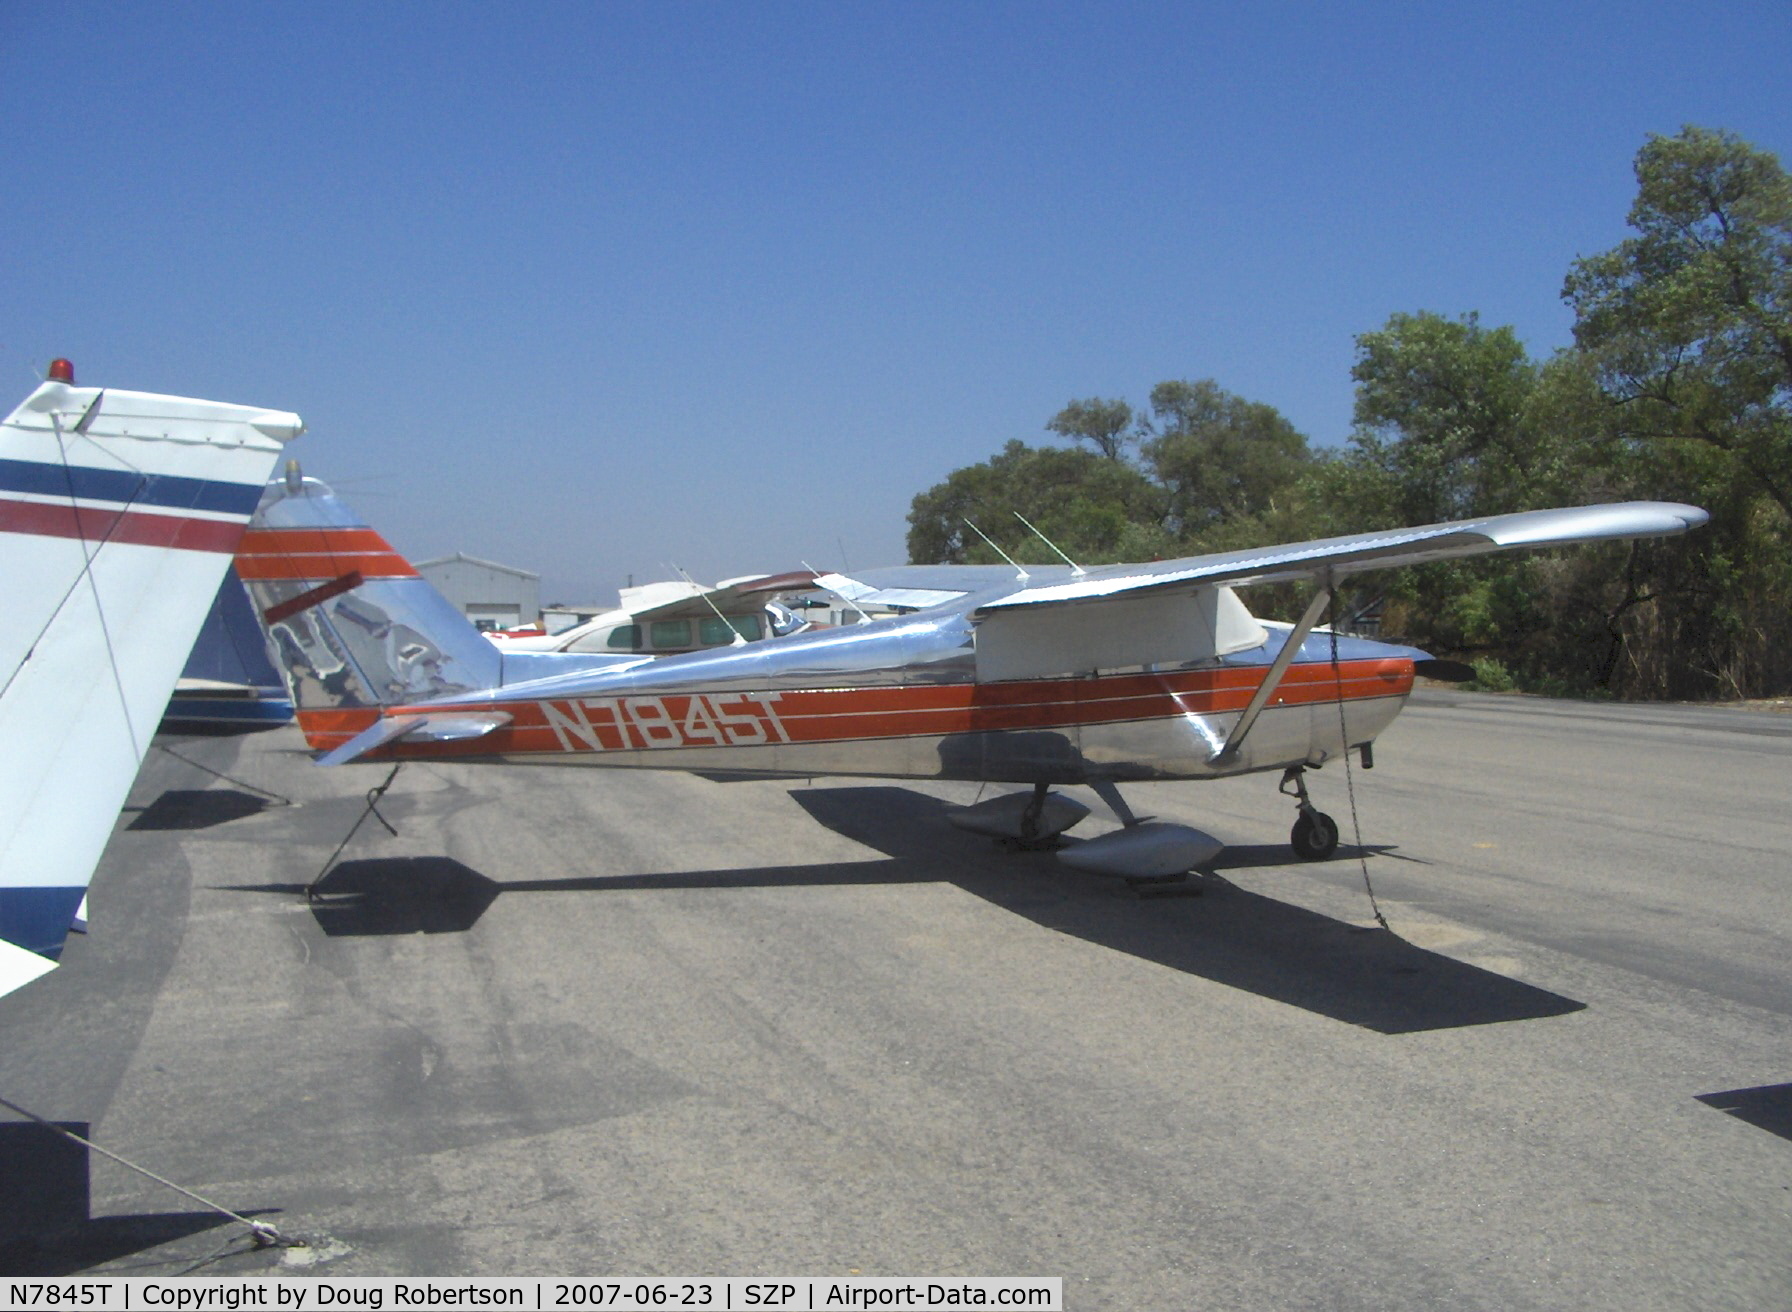 N7845T, 1960 Cessna 172A C/N 47445, 1960 Cessna 172A, Continental O-300 145 Hp, highly polished aluminum